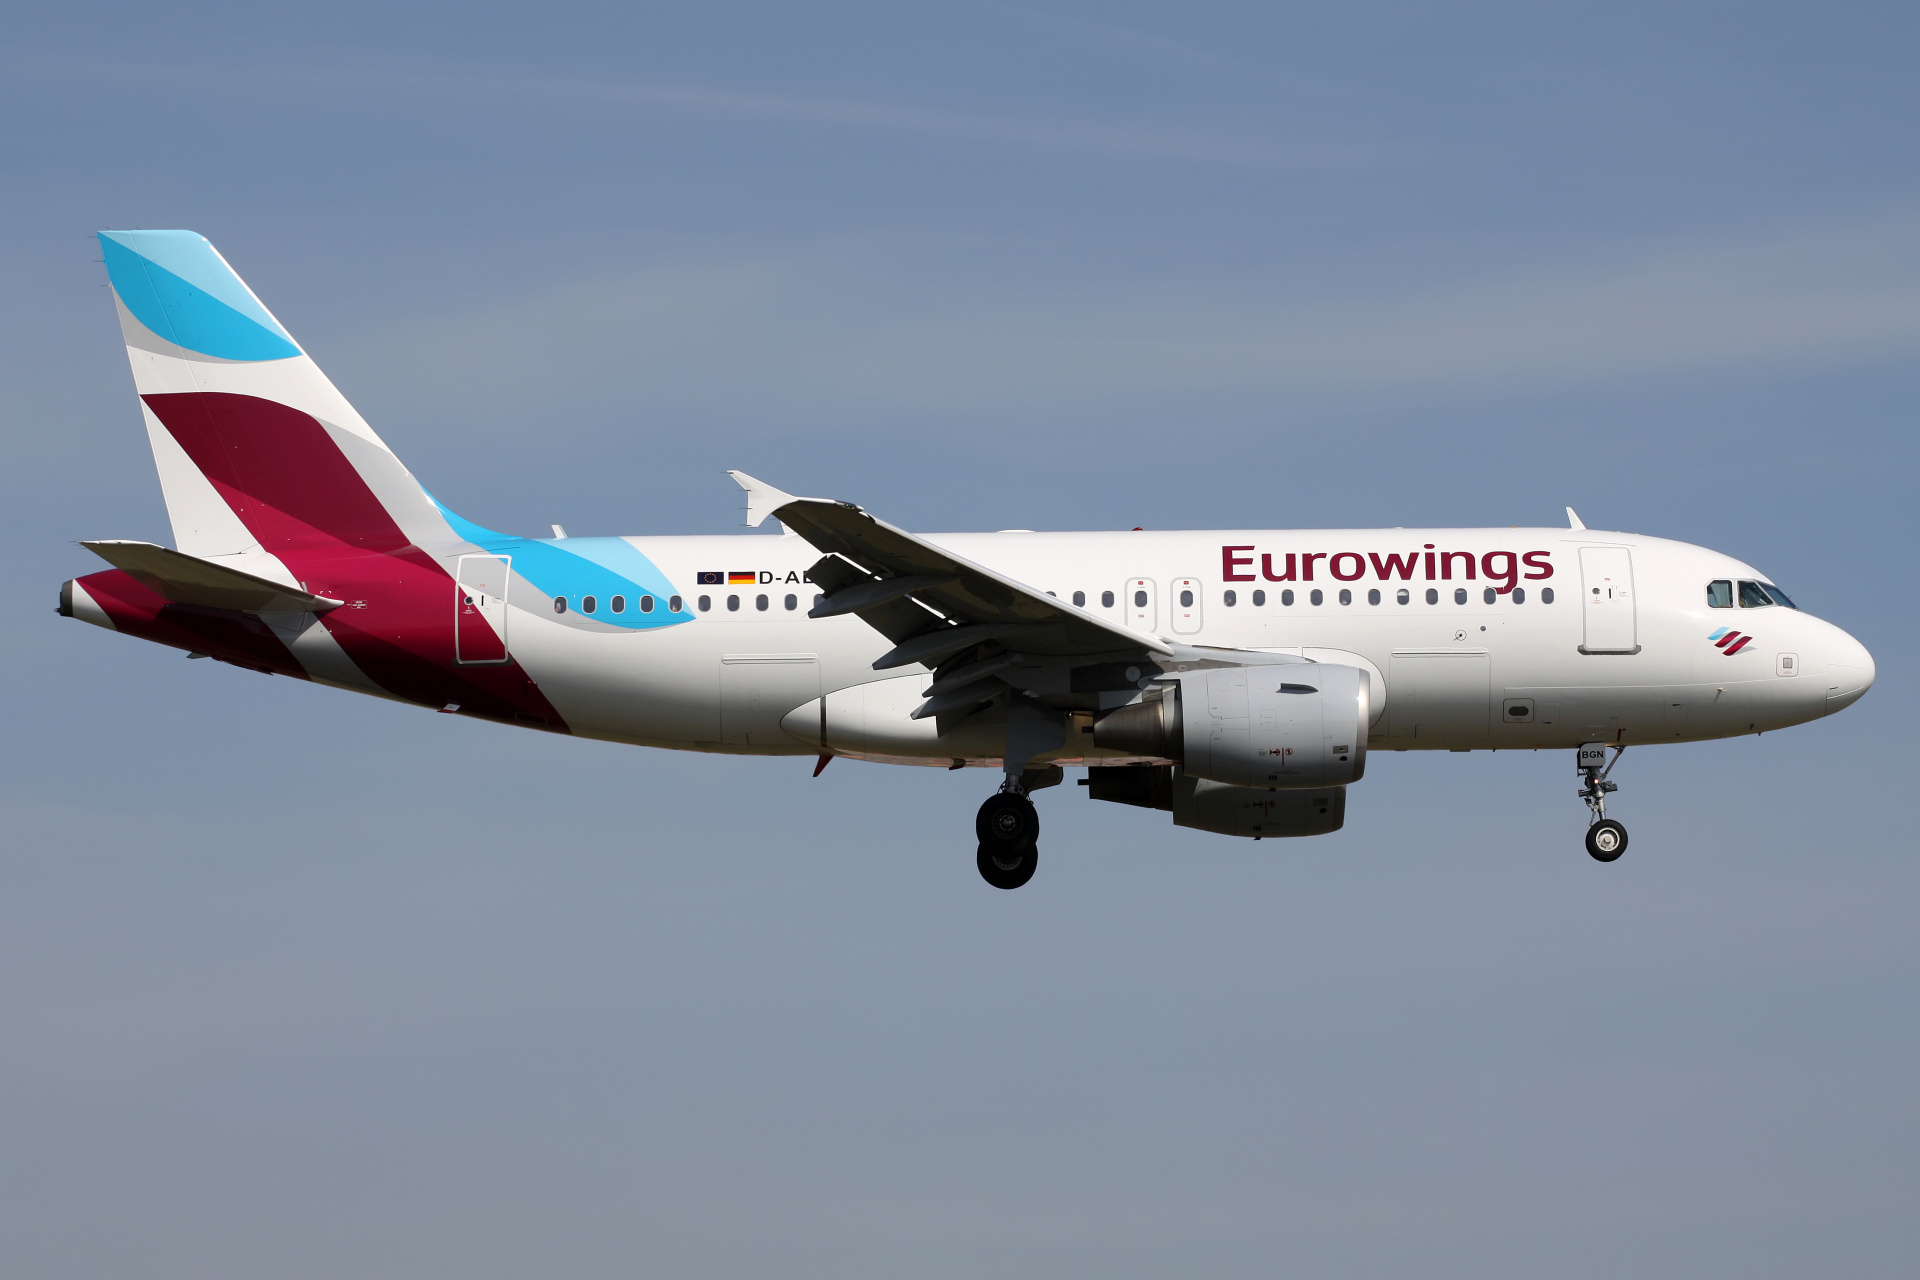 D-ABGN, Eurowings (Aircraft » EPWA Spotting » Airbus A319-100)